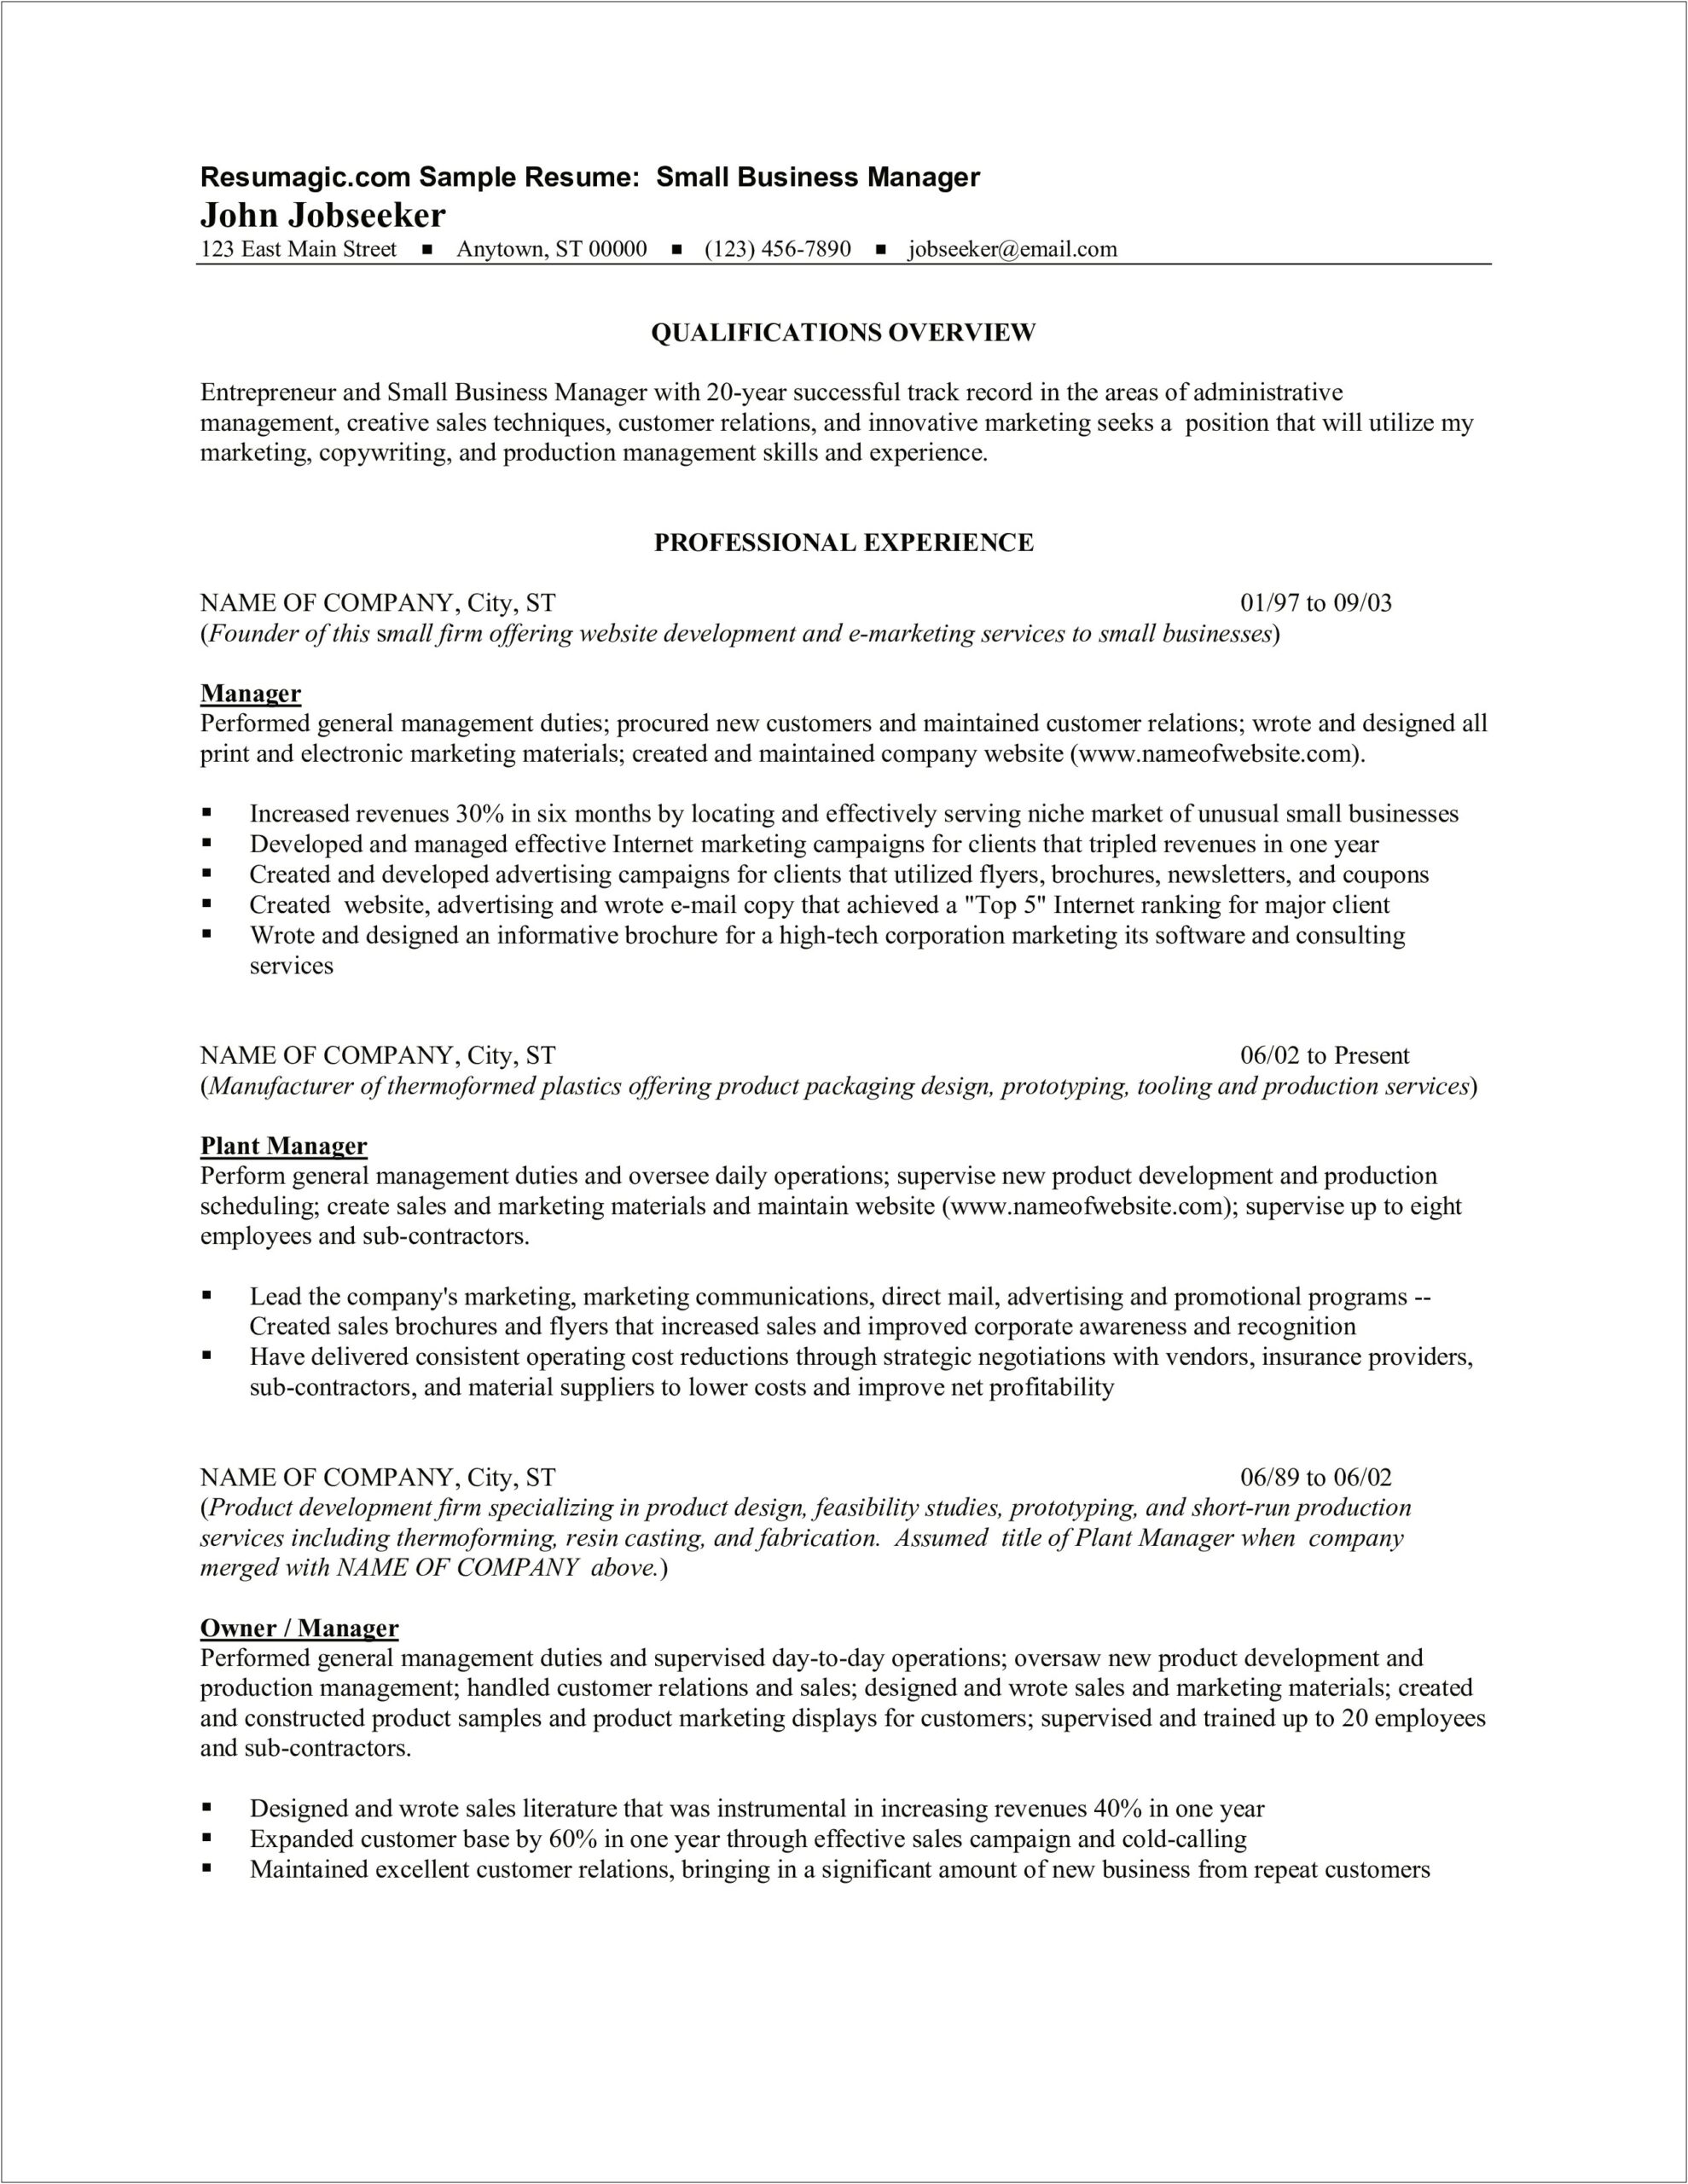 Resume Input For Managing A Small Business